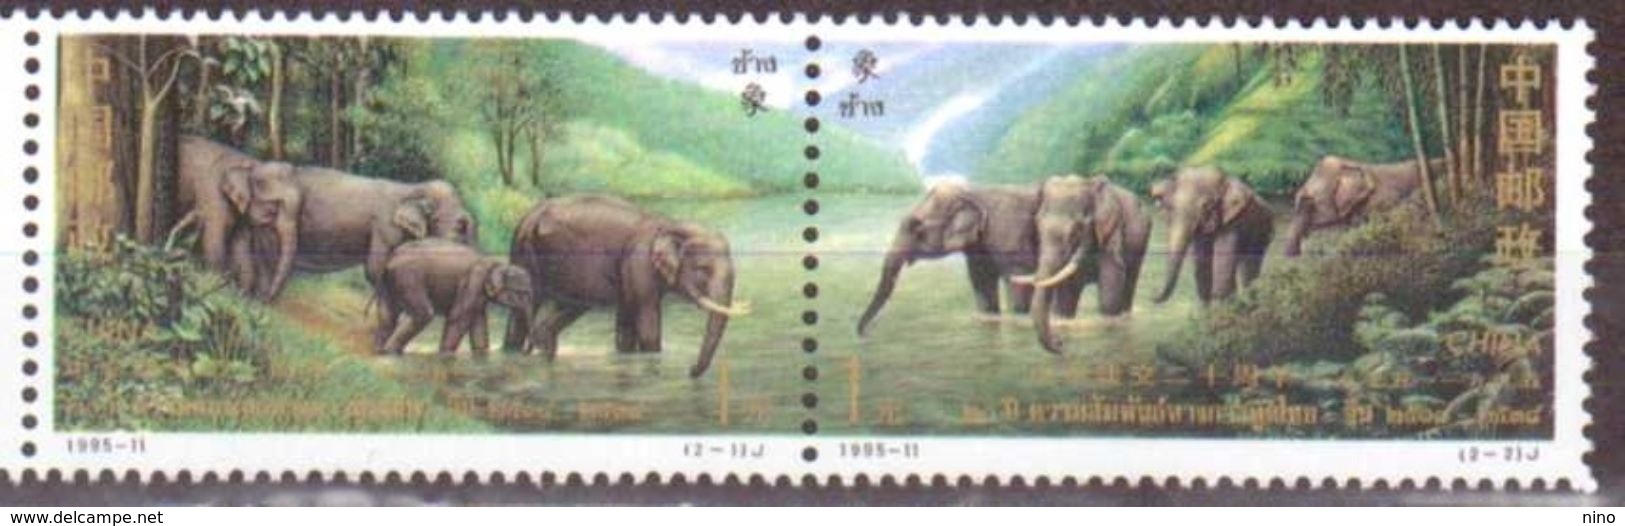 China. Scott # 2579-80 MNH Pair. 20th. Anniv. Of Diplom. Relations.  Joint Issue With Thailand 1995 - Joint Issues